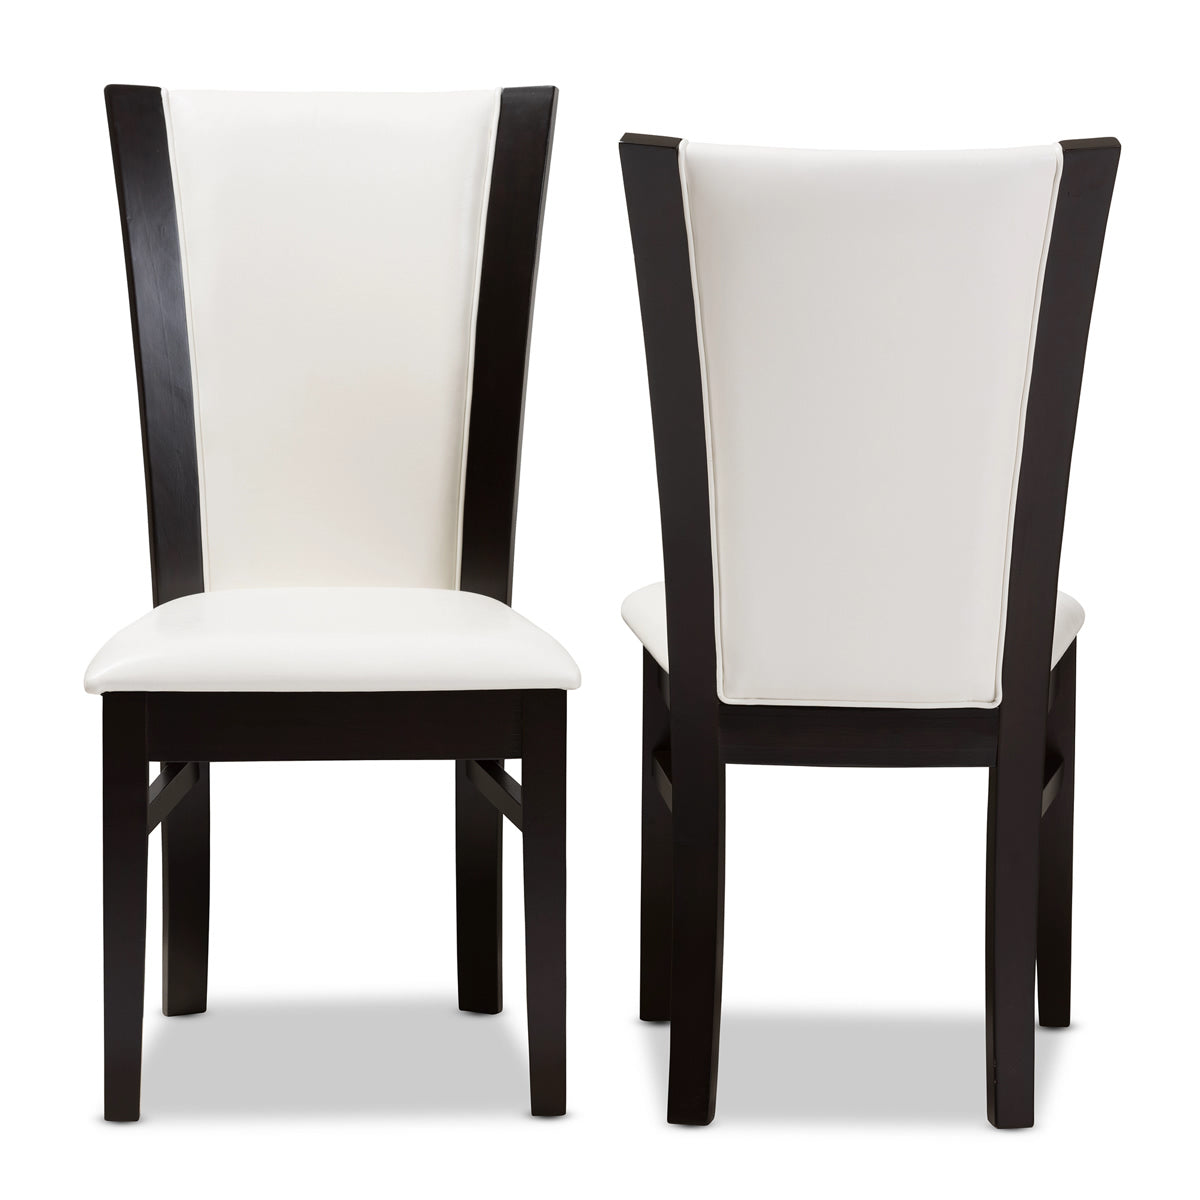 Baxton Studio Adley Modern and Contemporary Dark Brown Finished White Faux Leather Dining Chair (Set of 2) Baxton Studio-dining chair-Minimal And Modern - 2